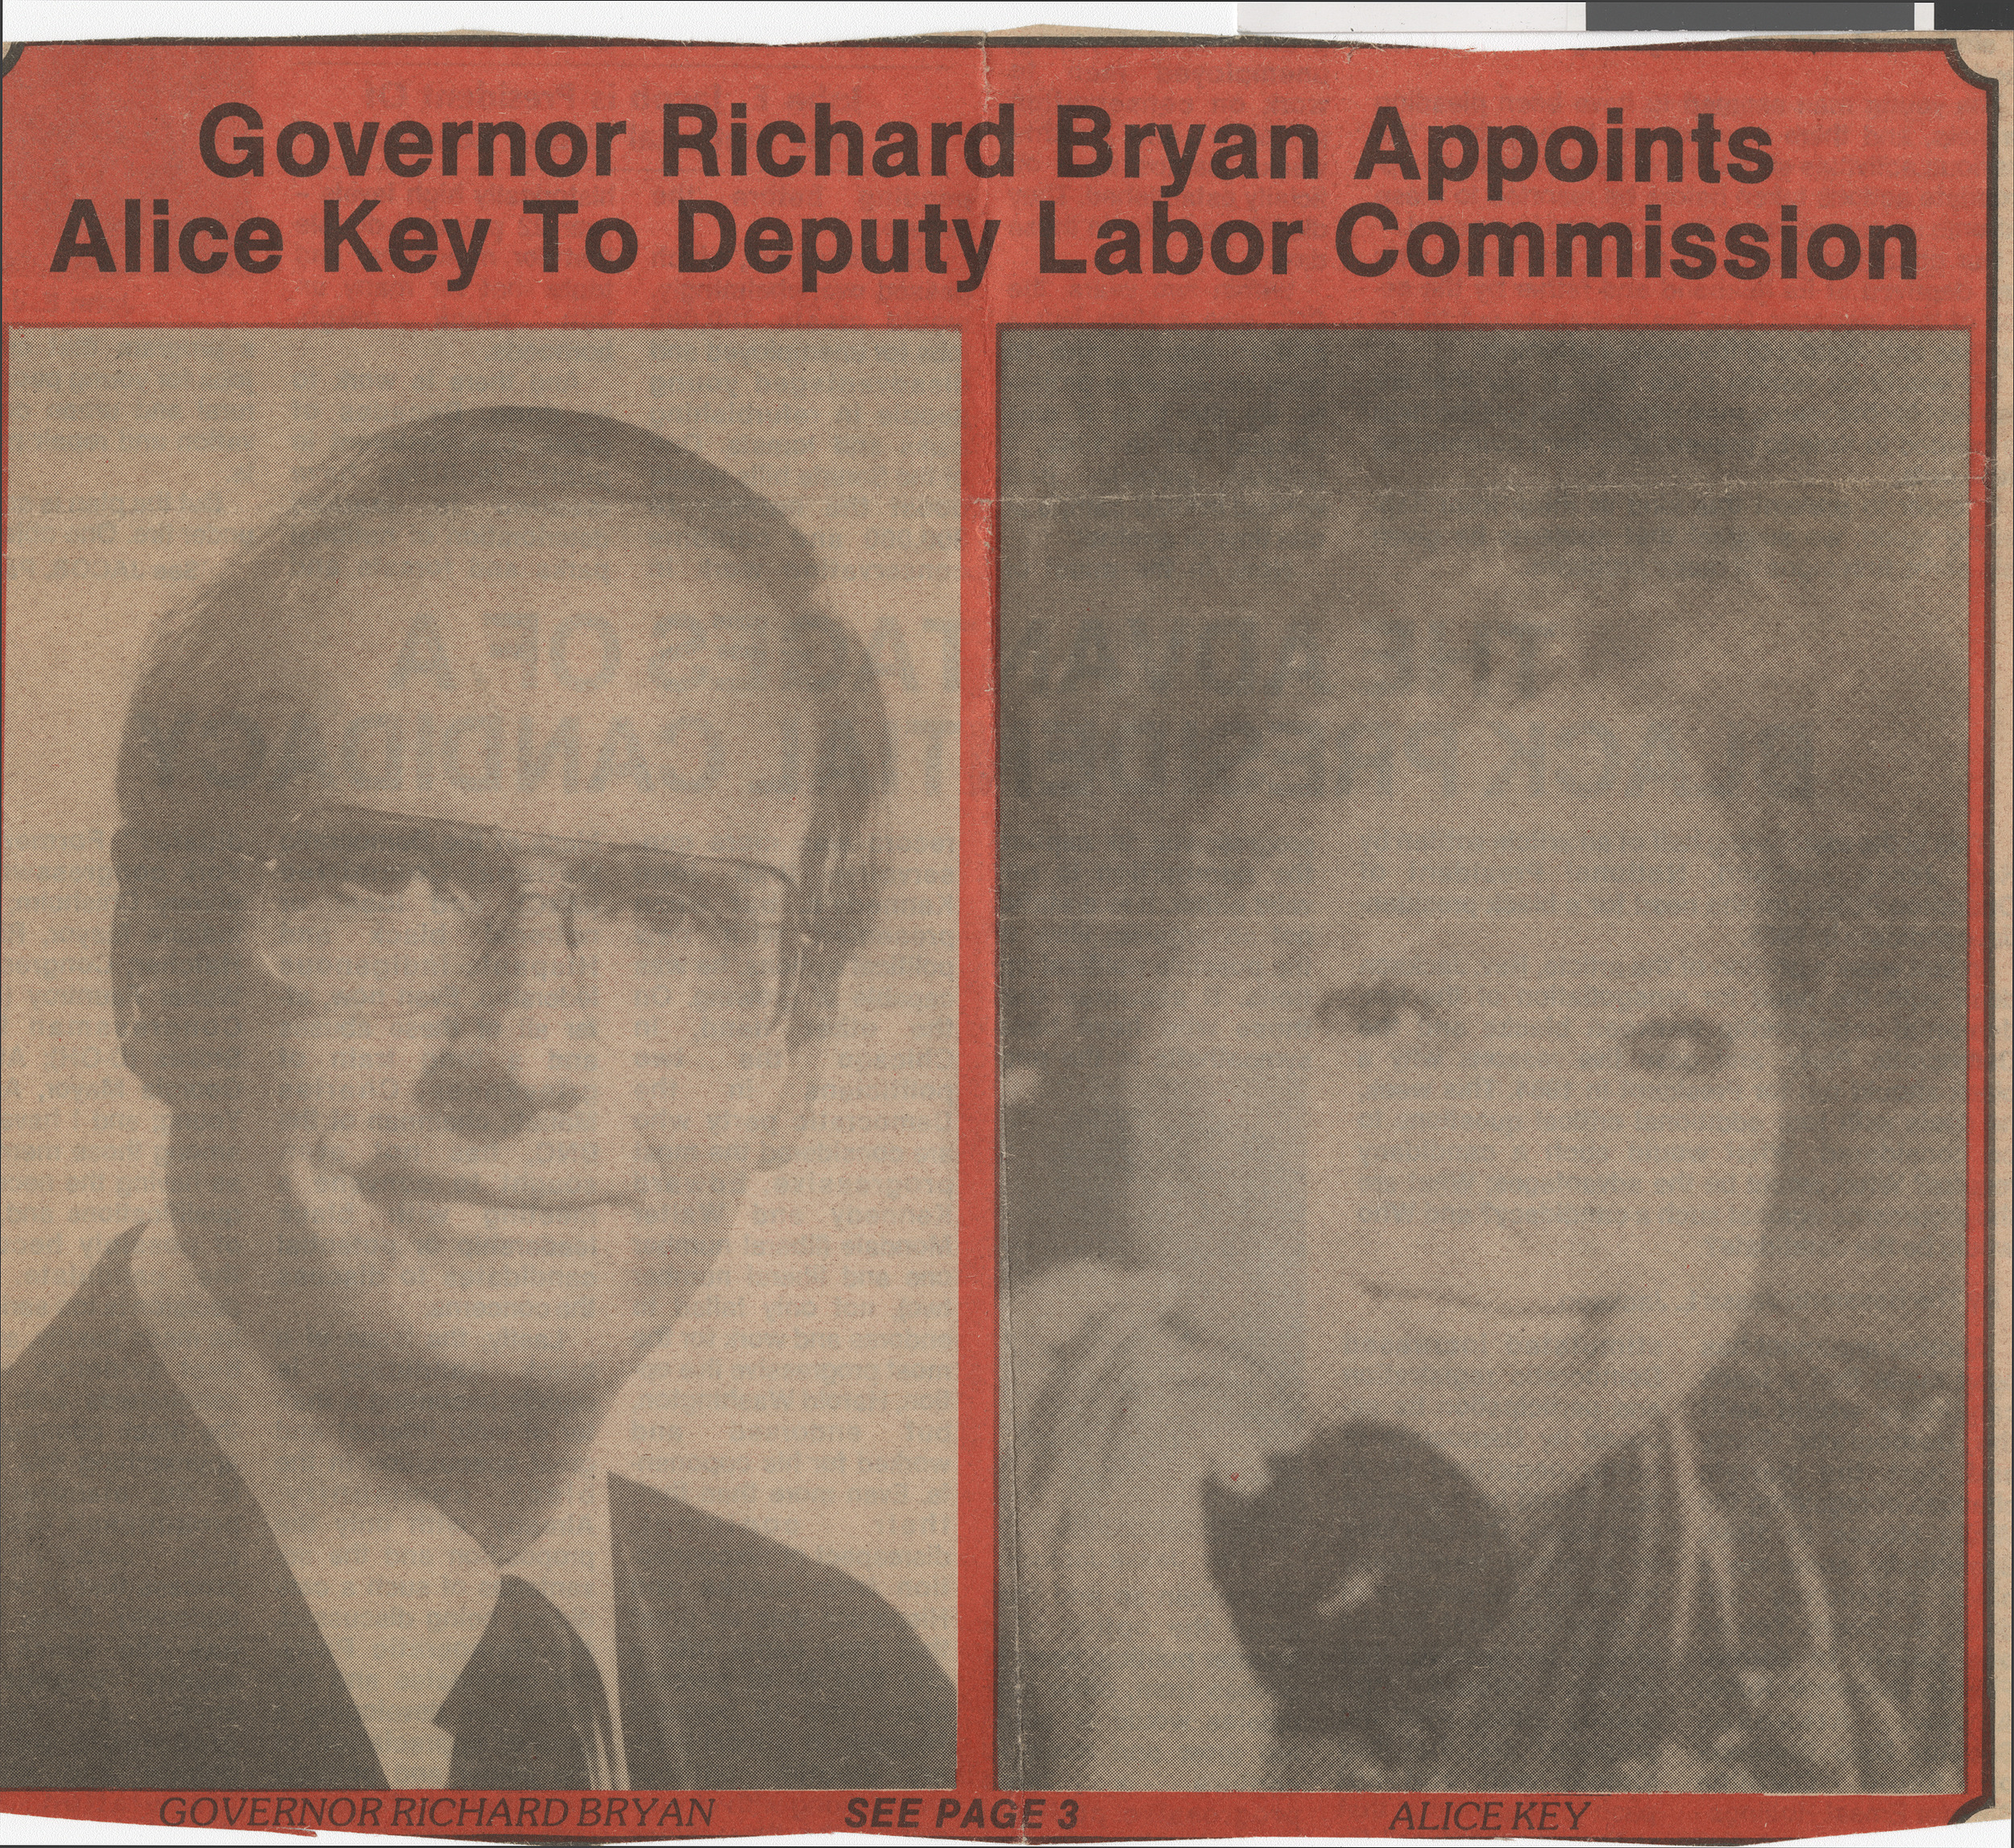 Newspaper clipping, Governor Richard Bryan Appoints Alice Key to Deputy Labor Commission, publication unknown, no date